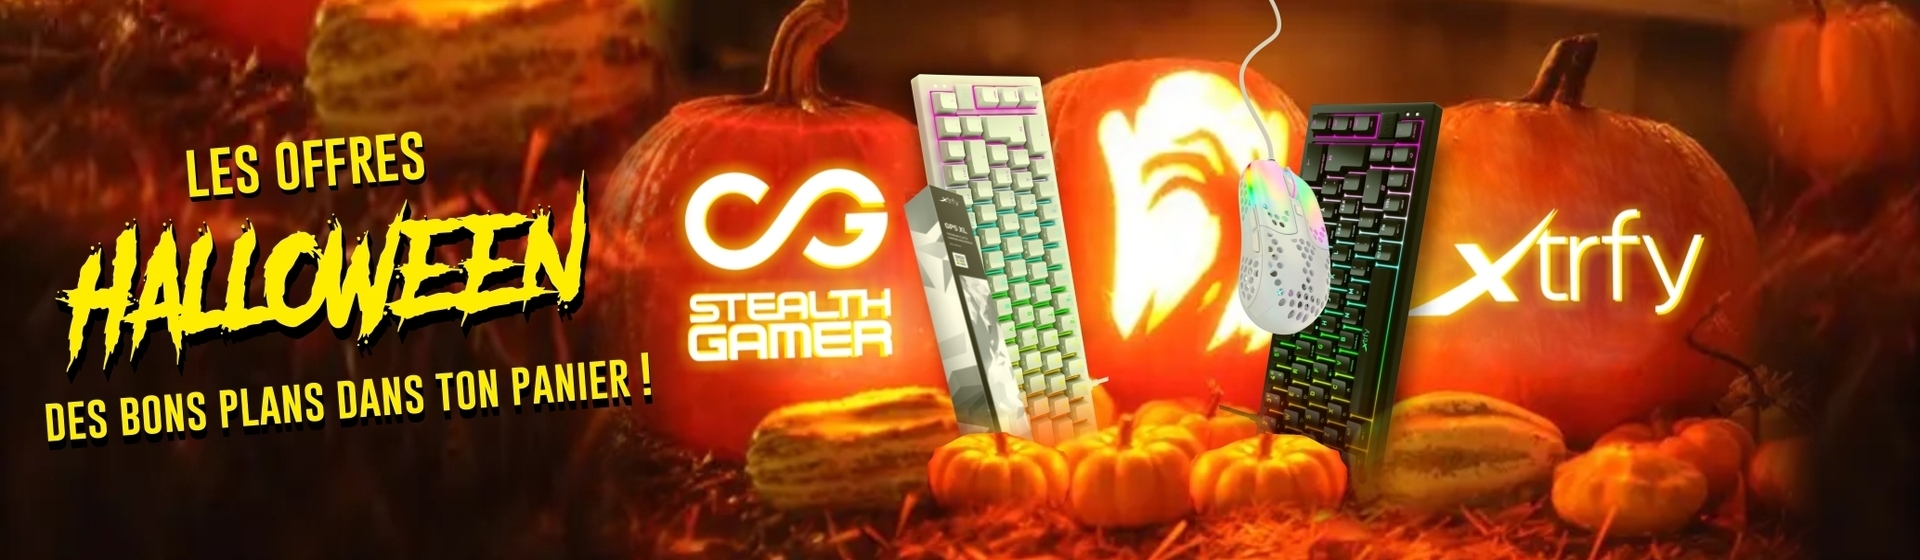 Promotions gaming Halloween